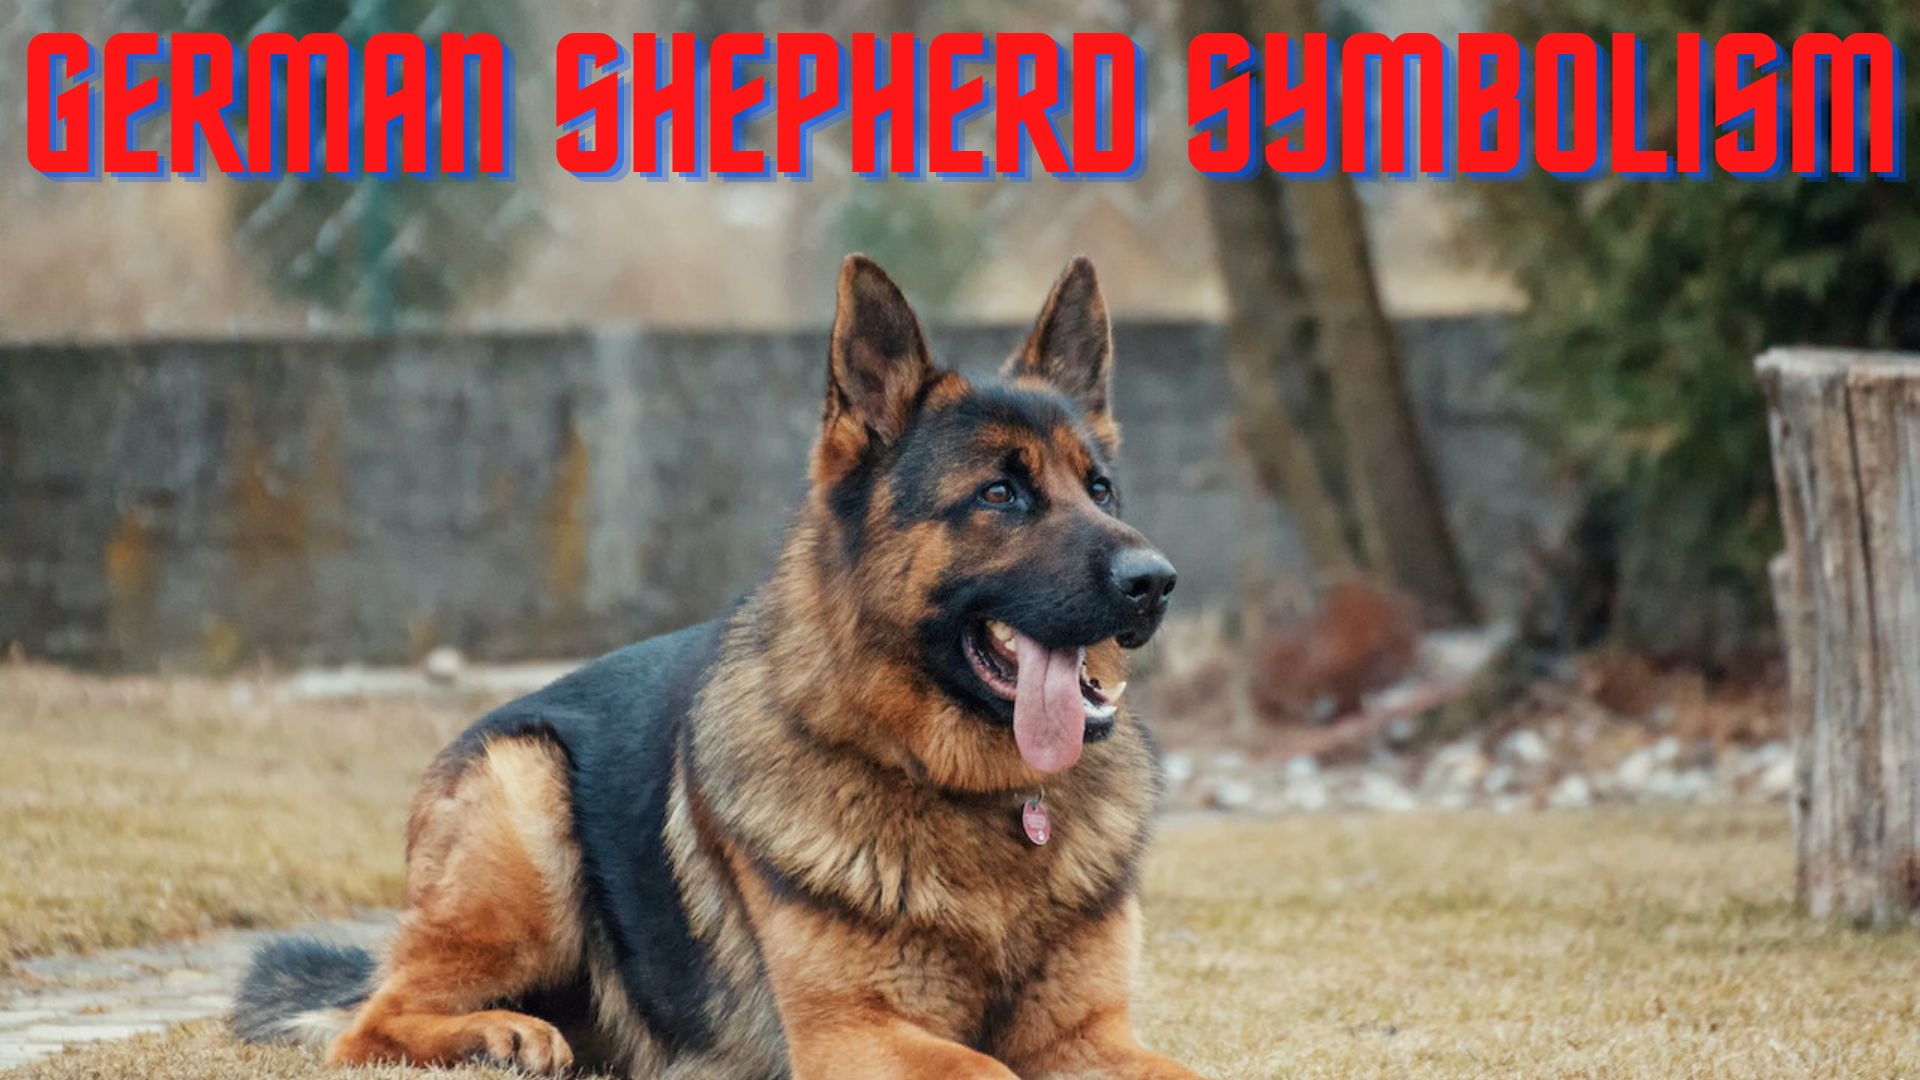 German Shepherd Symbolism - Protecting And Guarding Your Loved Ones